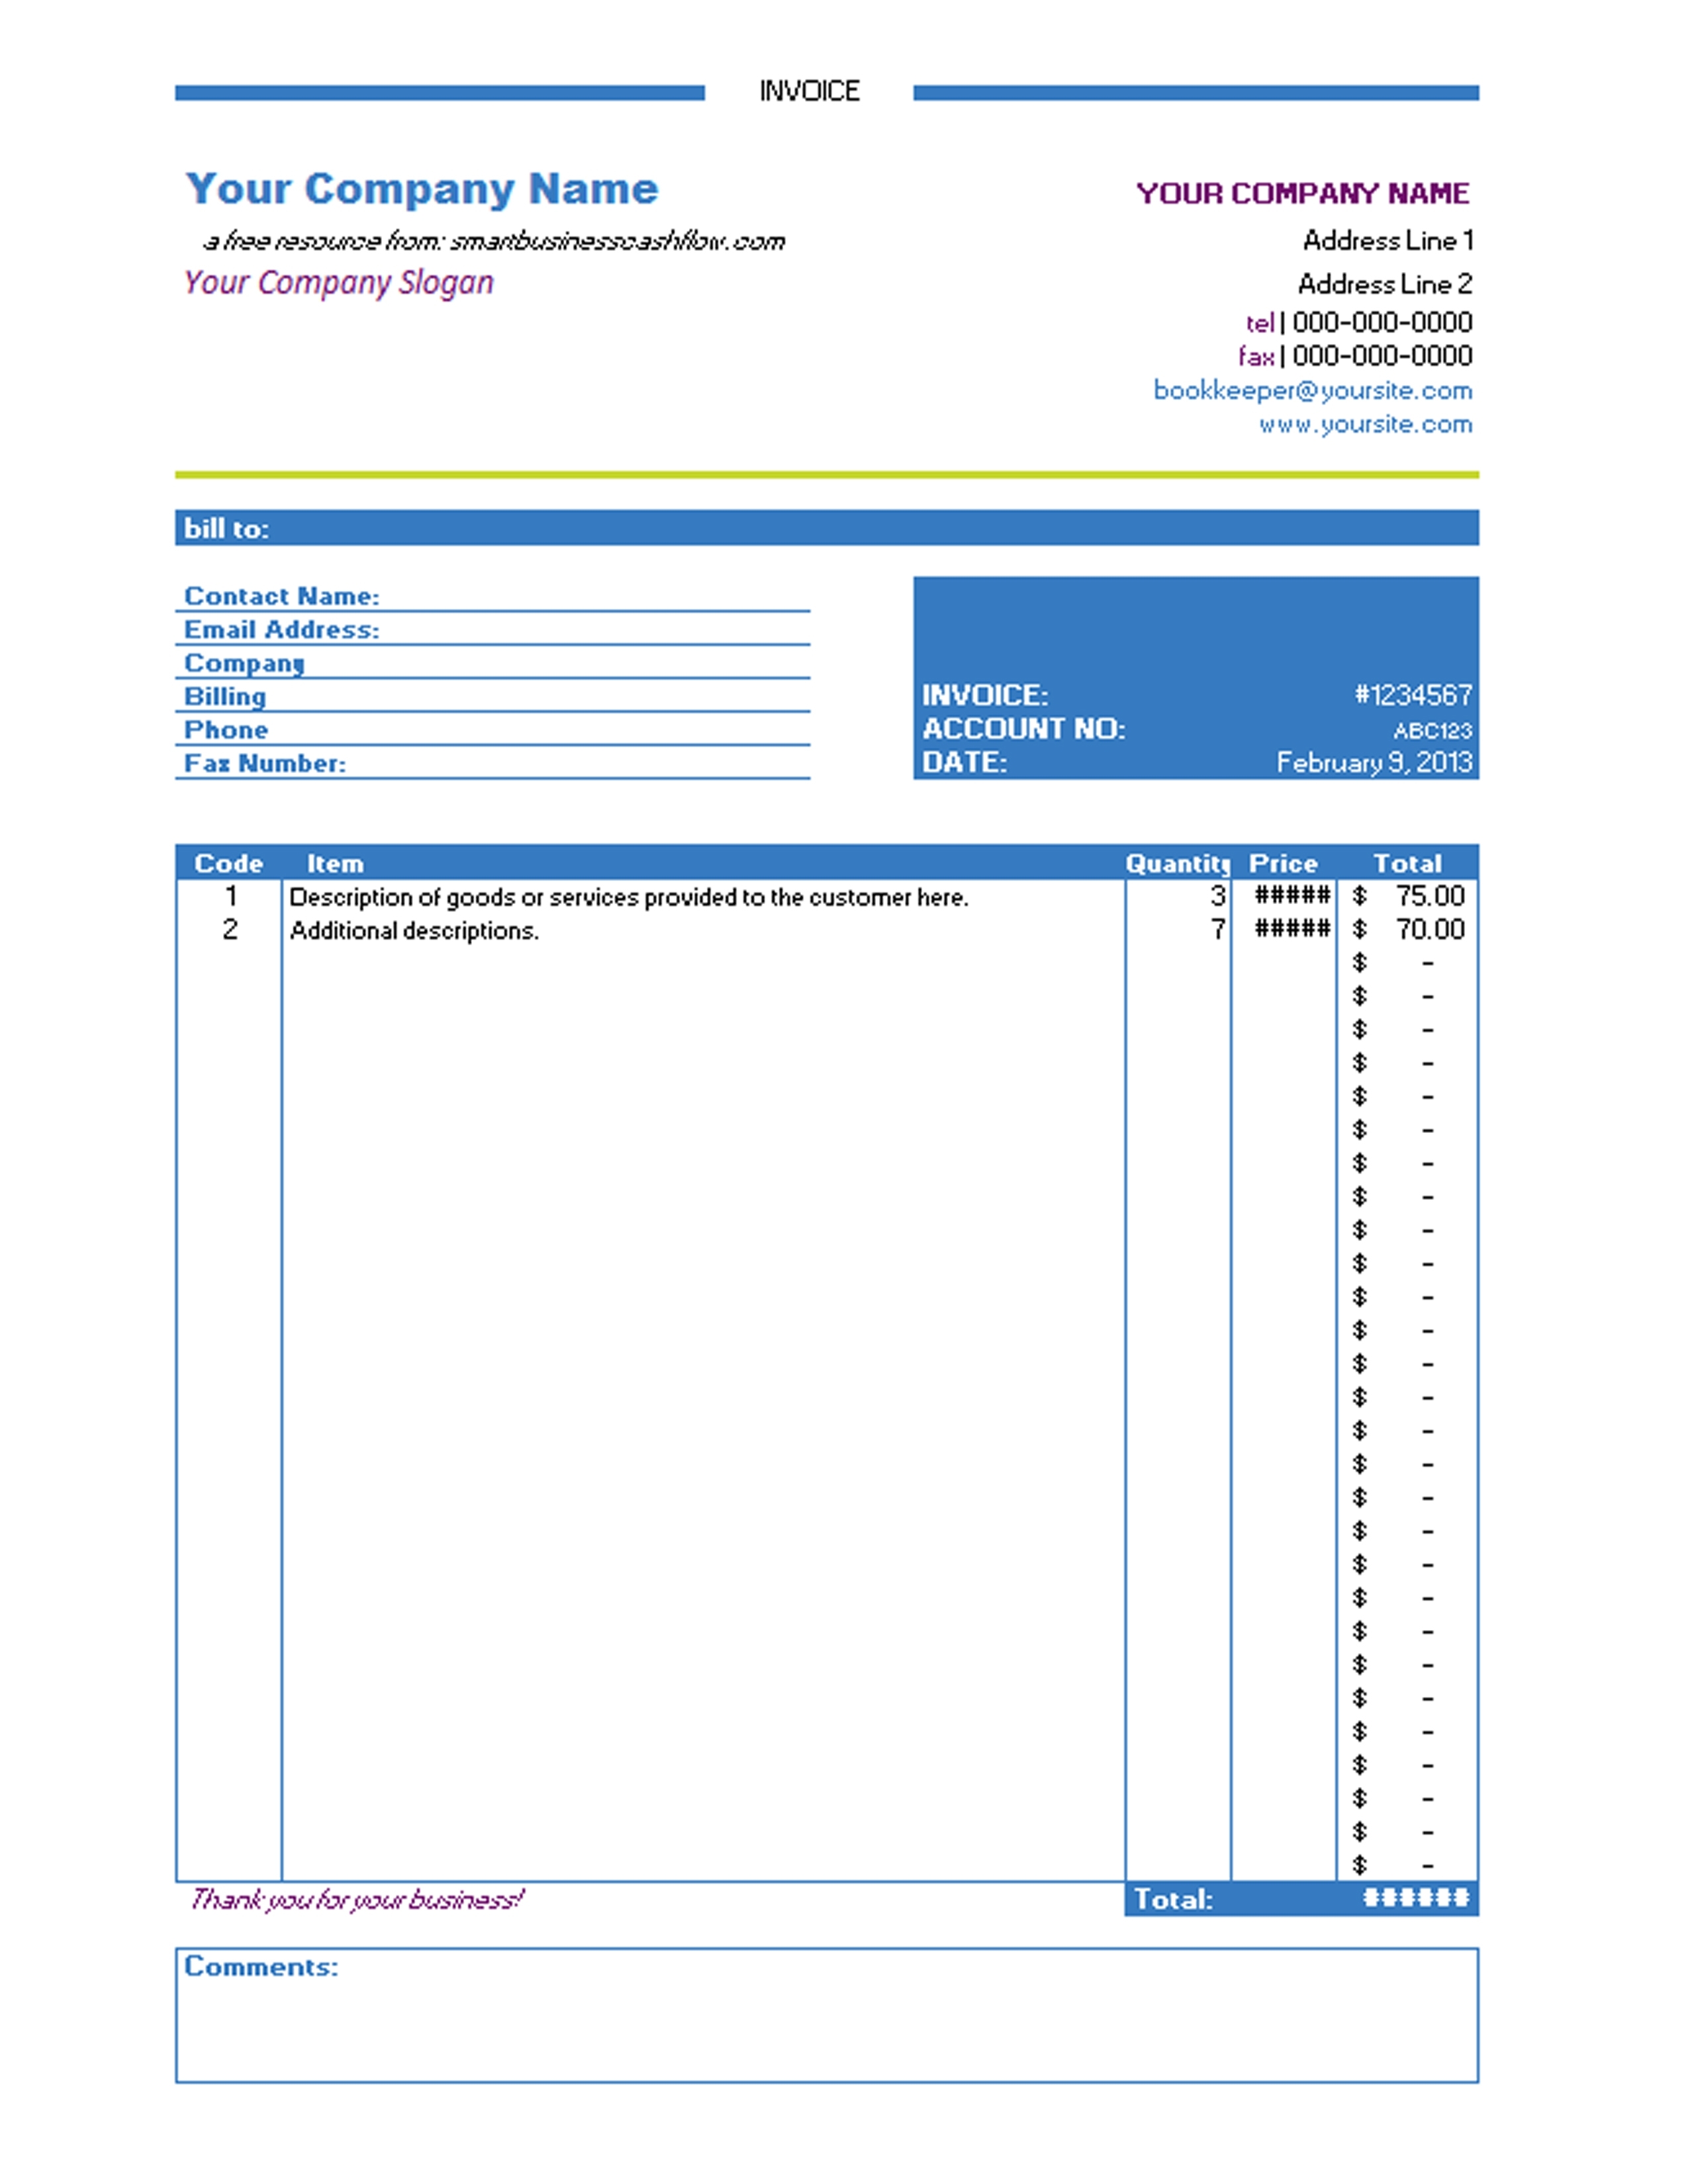 invoice templates for excel free invoice template free invoice templates for excel